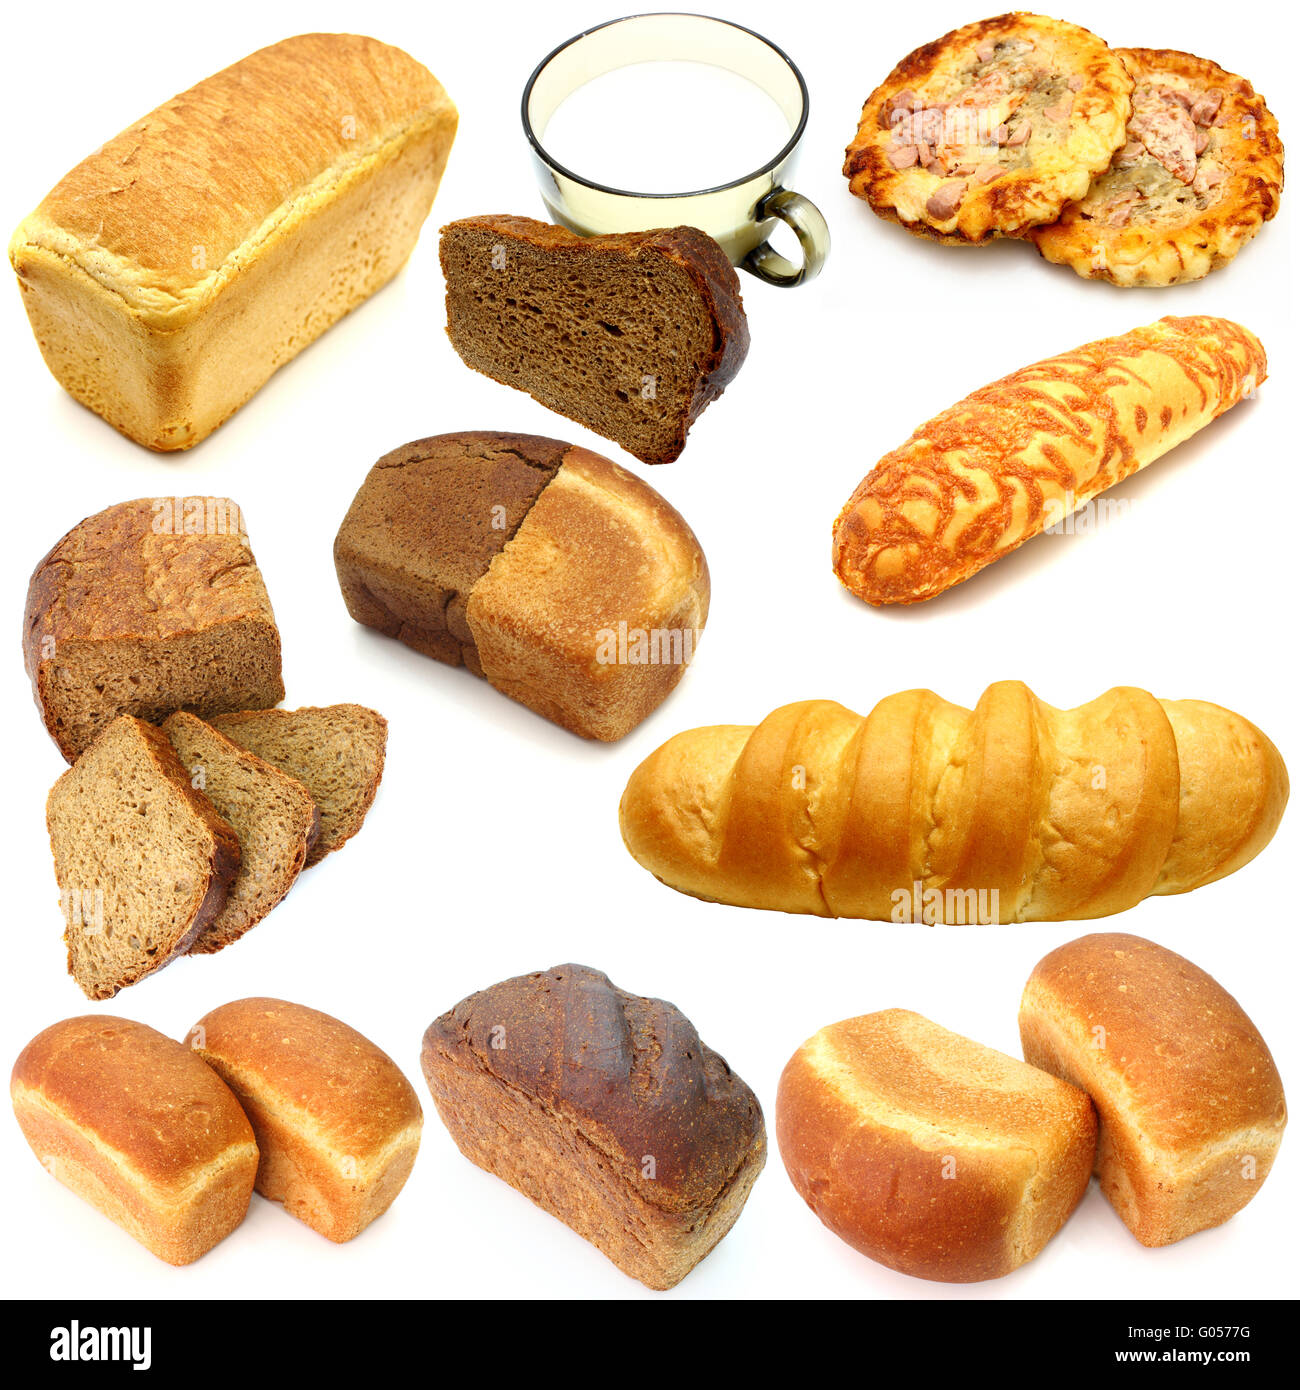 Assortment of different types of bread isolated on white background Stock Photo